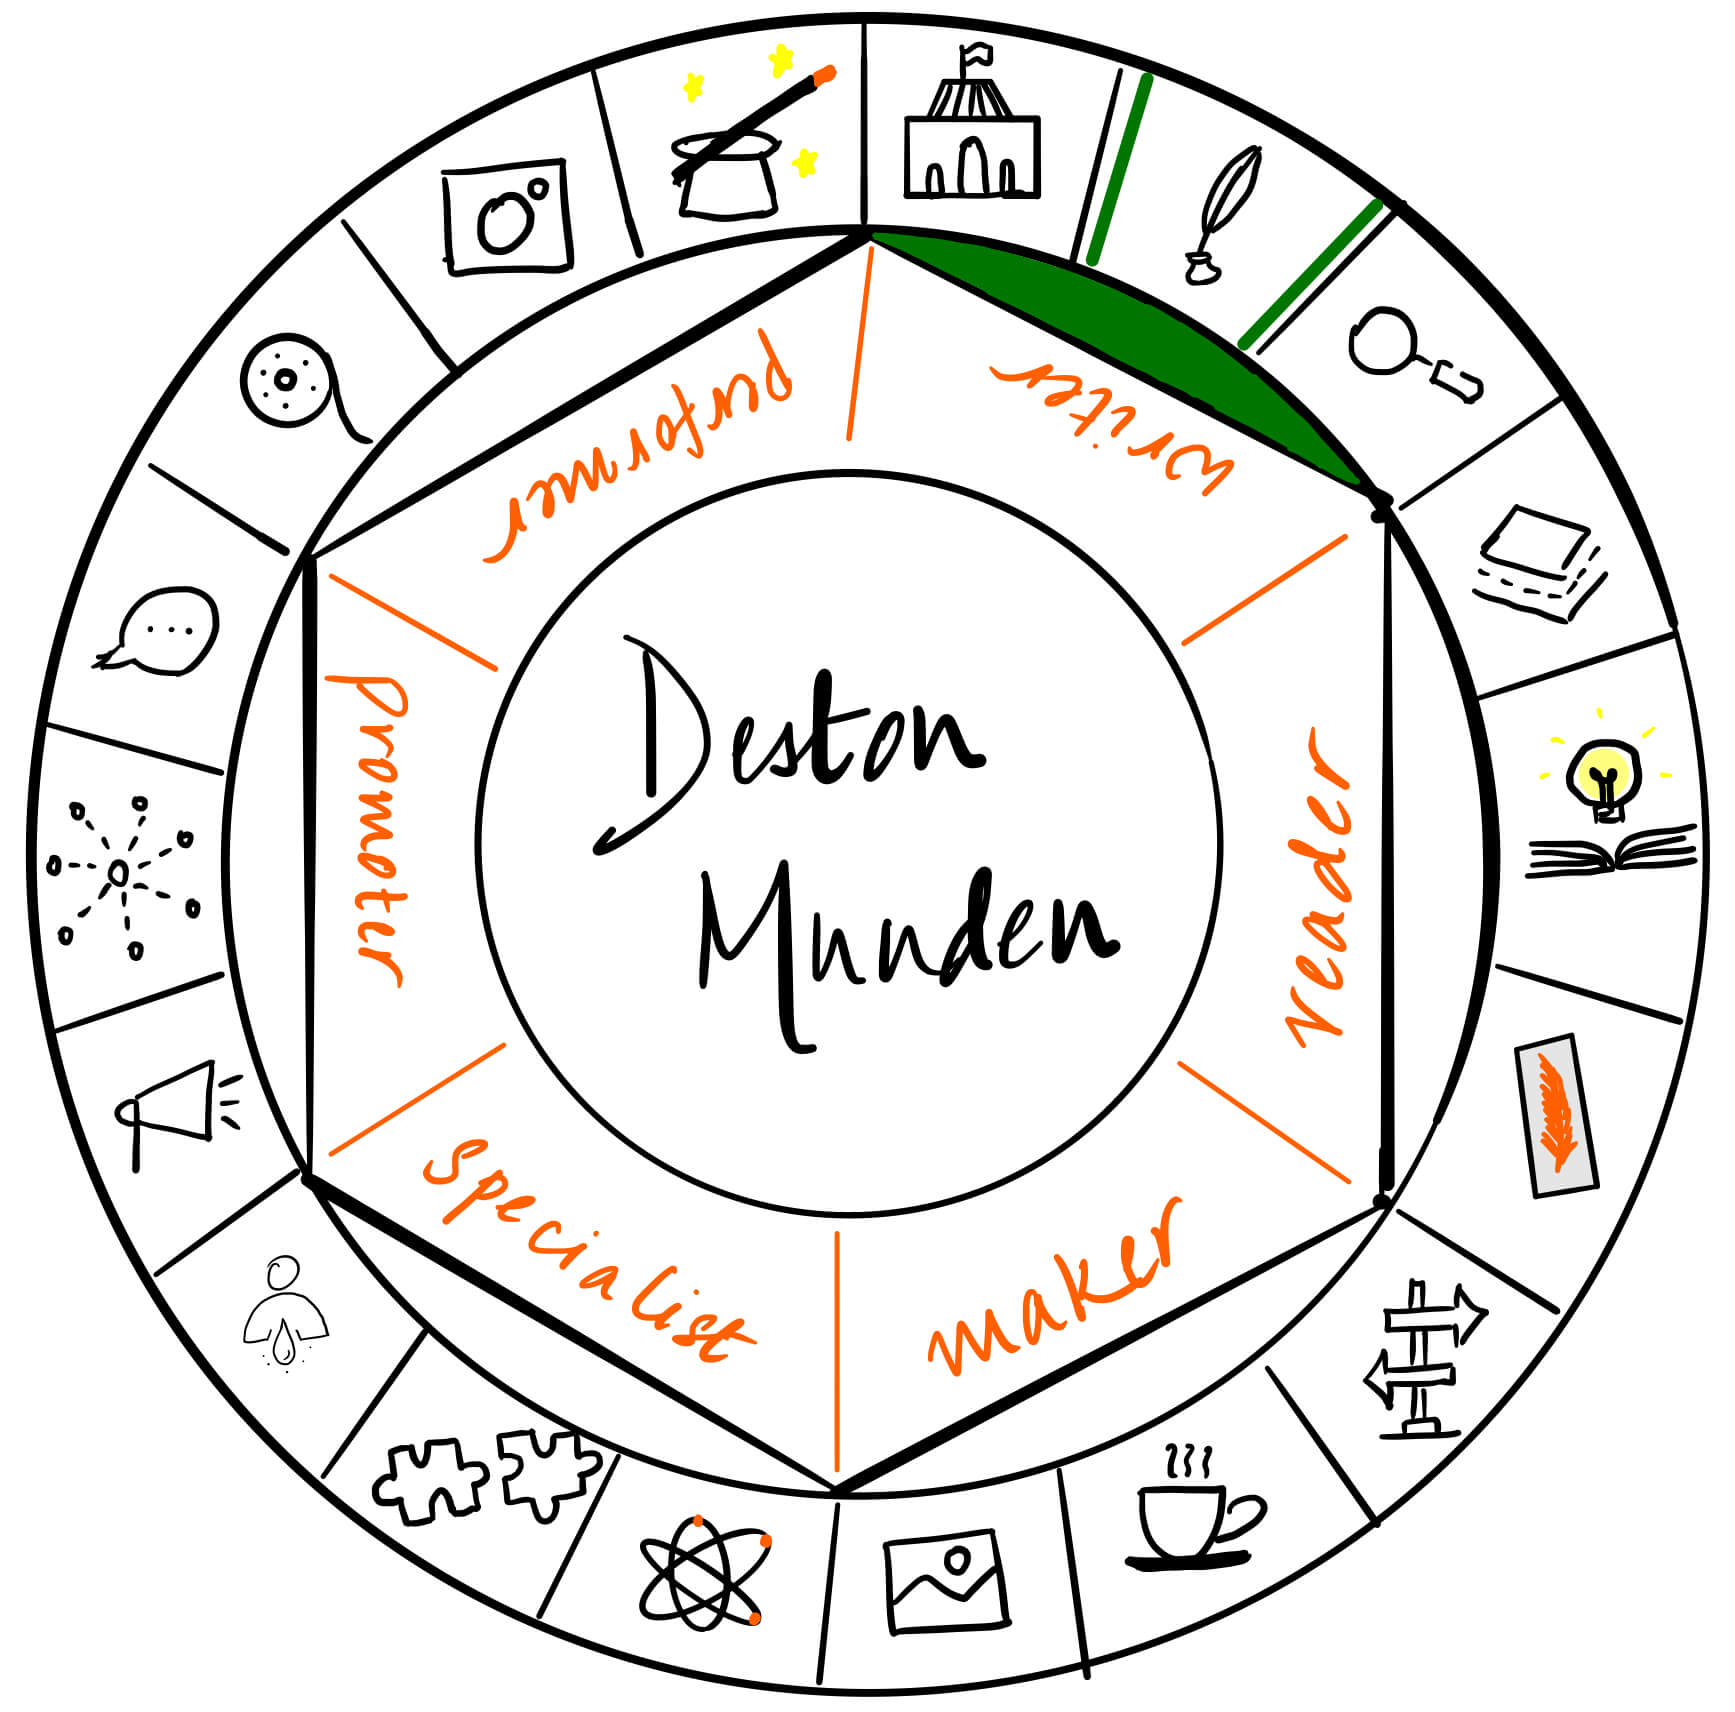 Deston Munden is a writer. It's a pleasure to have him over on The Creator's Roulette to talk about Dungeons and Dragons.